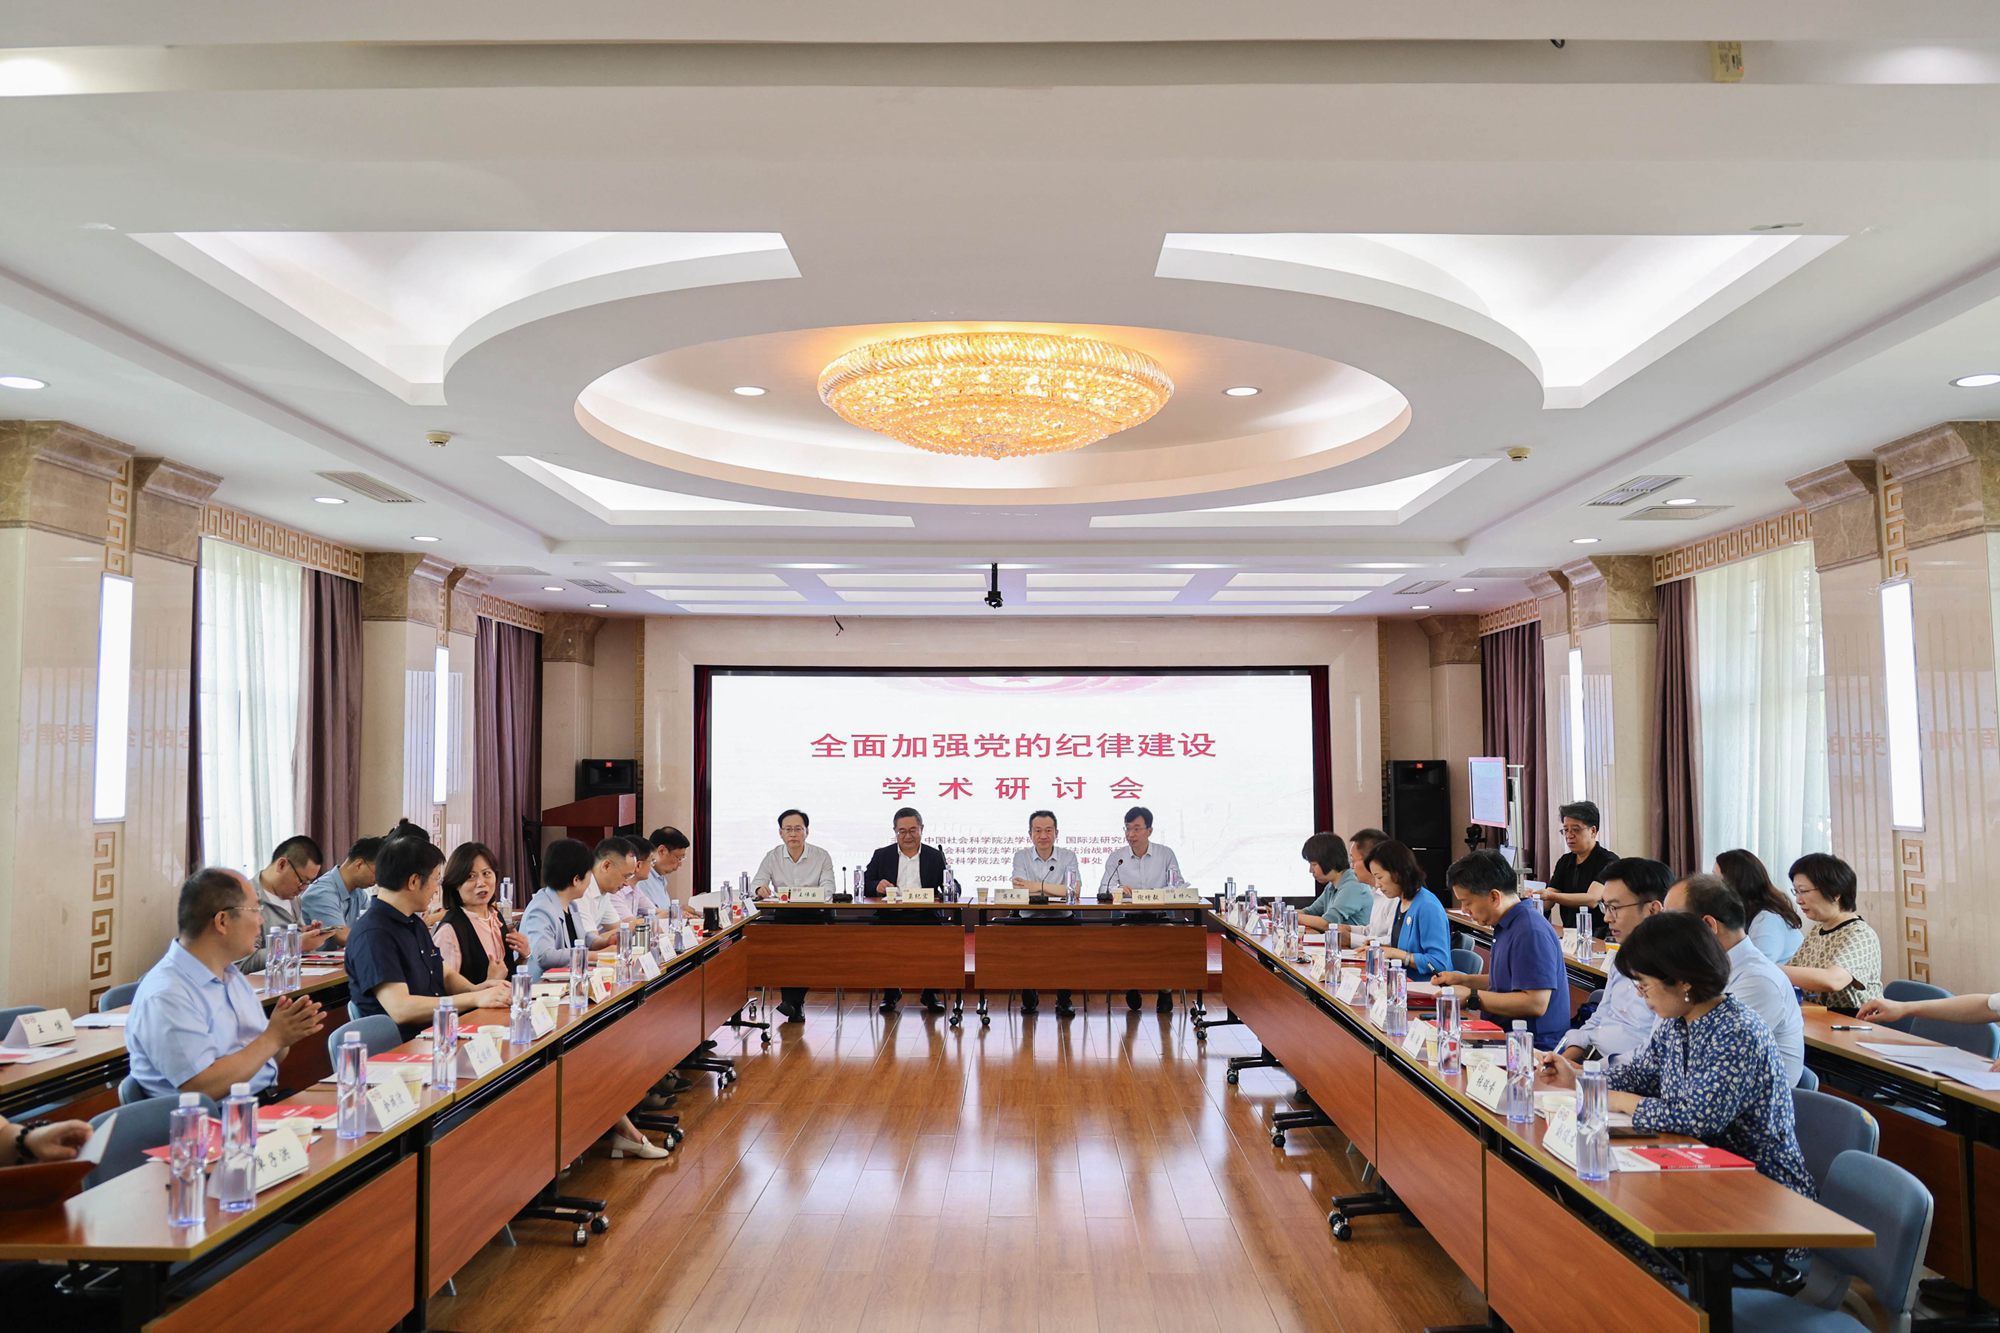 The academic seminar on Comprehensively Strengthening the Party's Discipline Construction held in Beijing